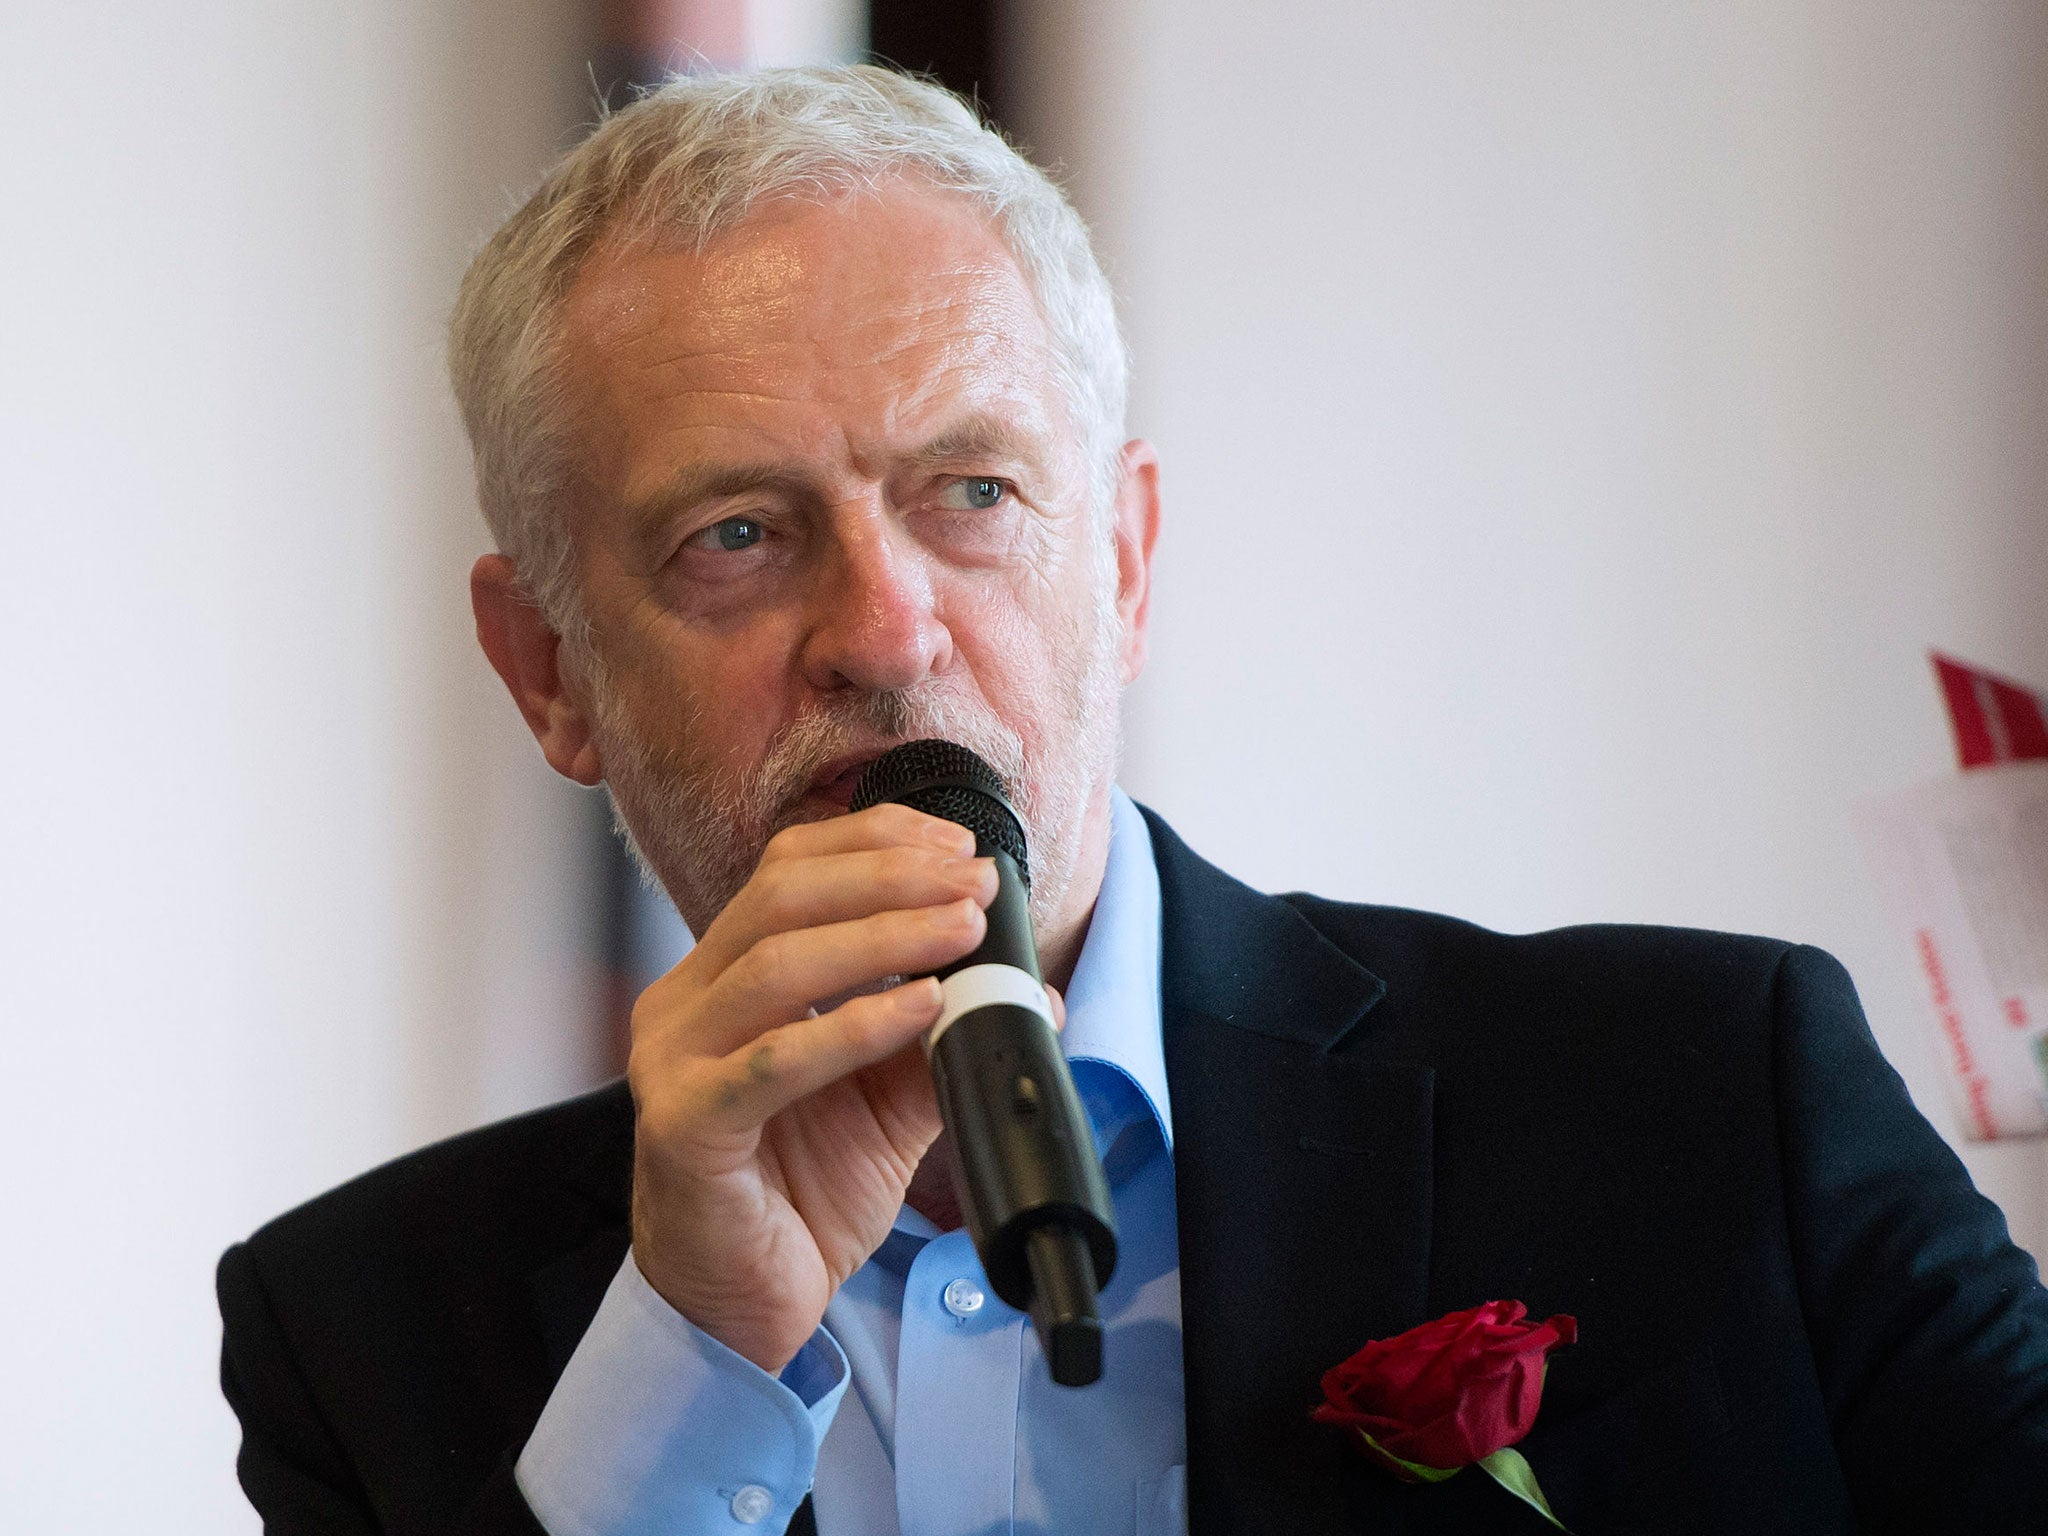 The Labour leader made the comments at an event to mark 50 years since homosexuality was decriminalised